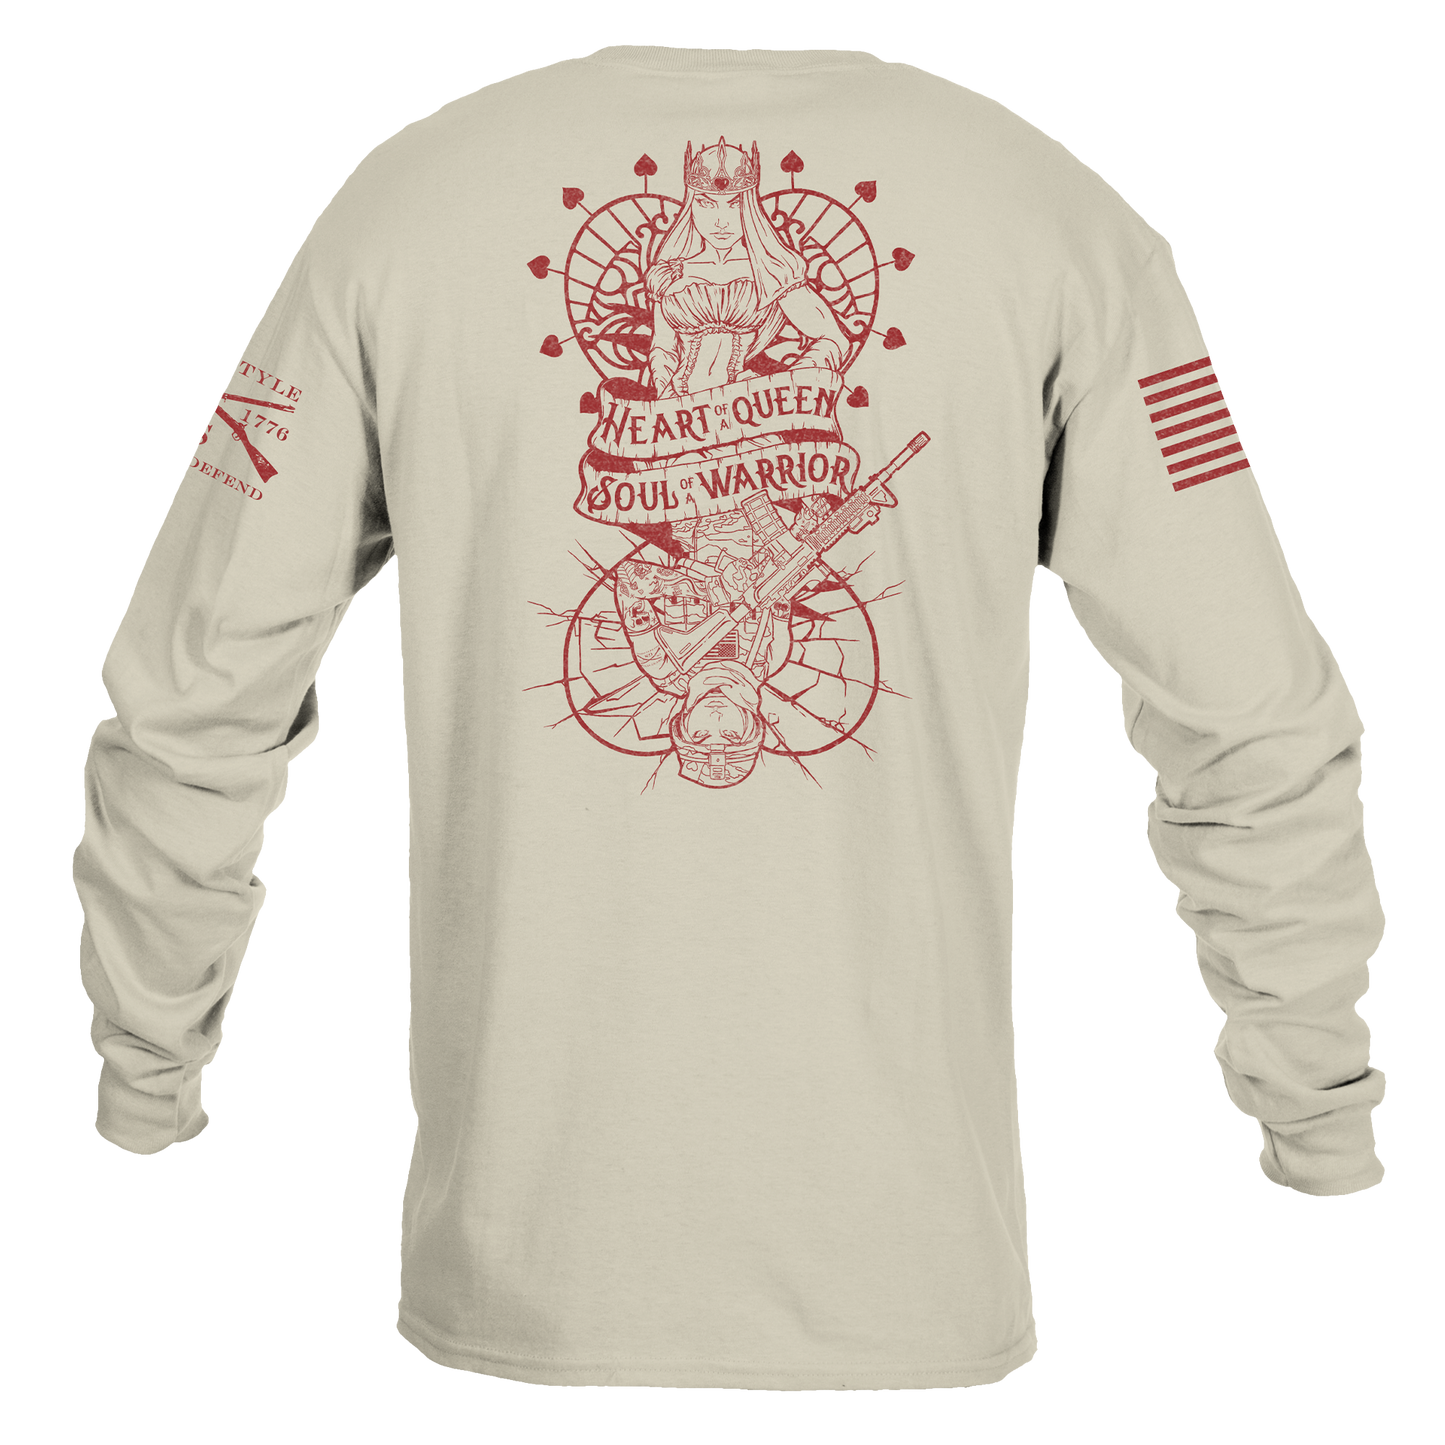 Veteran Apparel - Military Shirt - Heart and Soul of a Warrior Long Sleeve